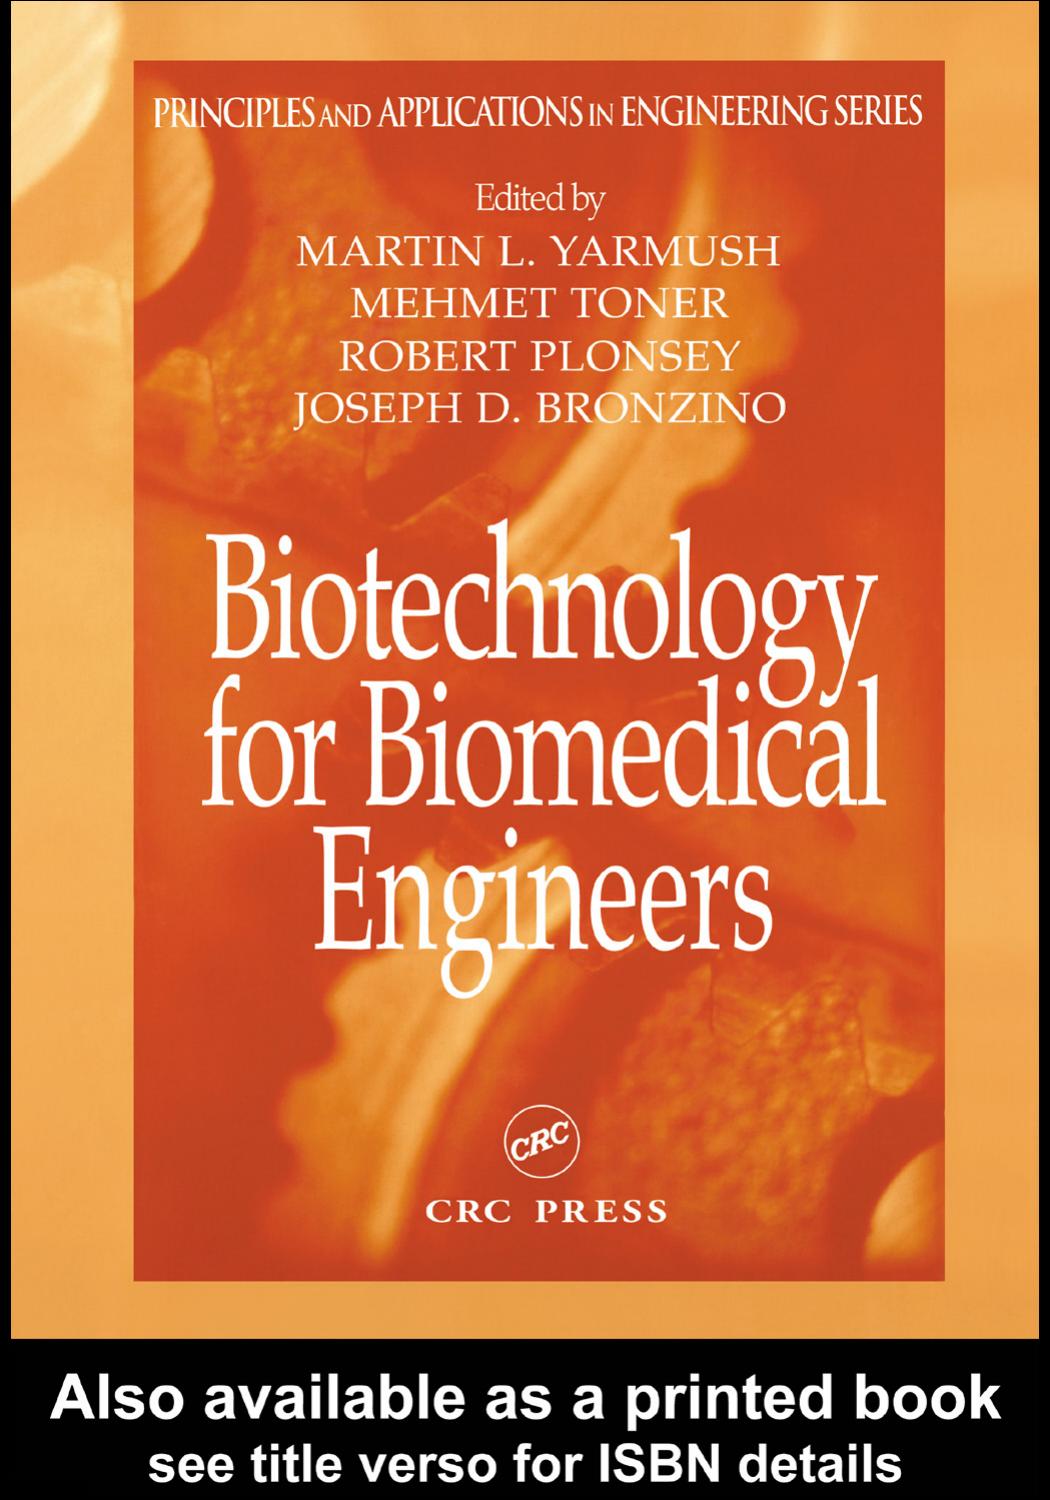 Biotechnology for Biomedical Engineers: Principles and Applications in Engineering Series